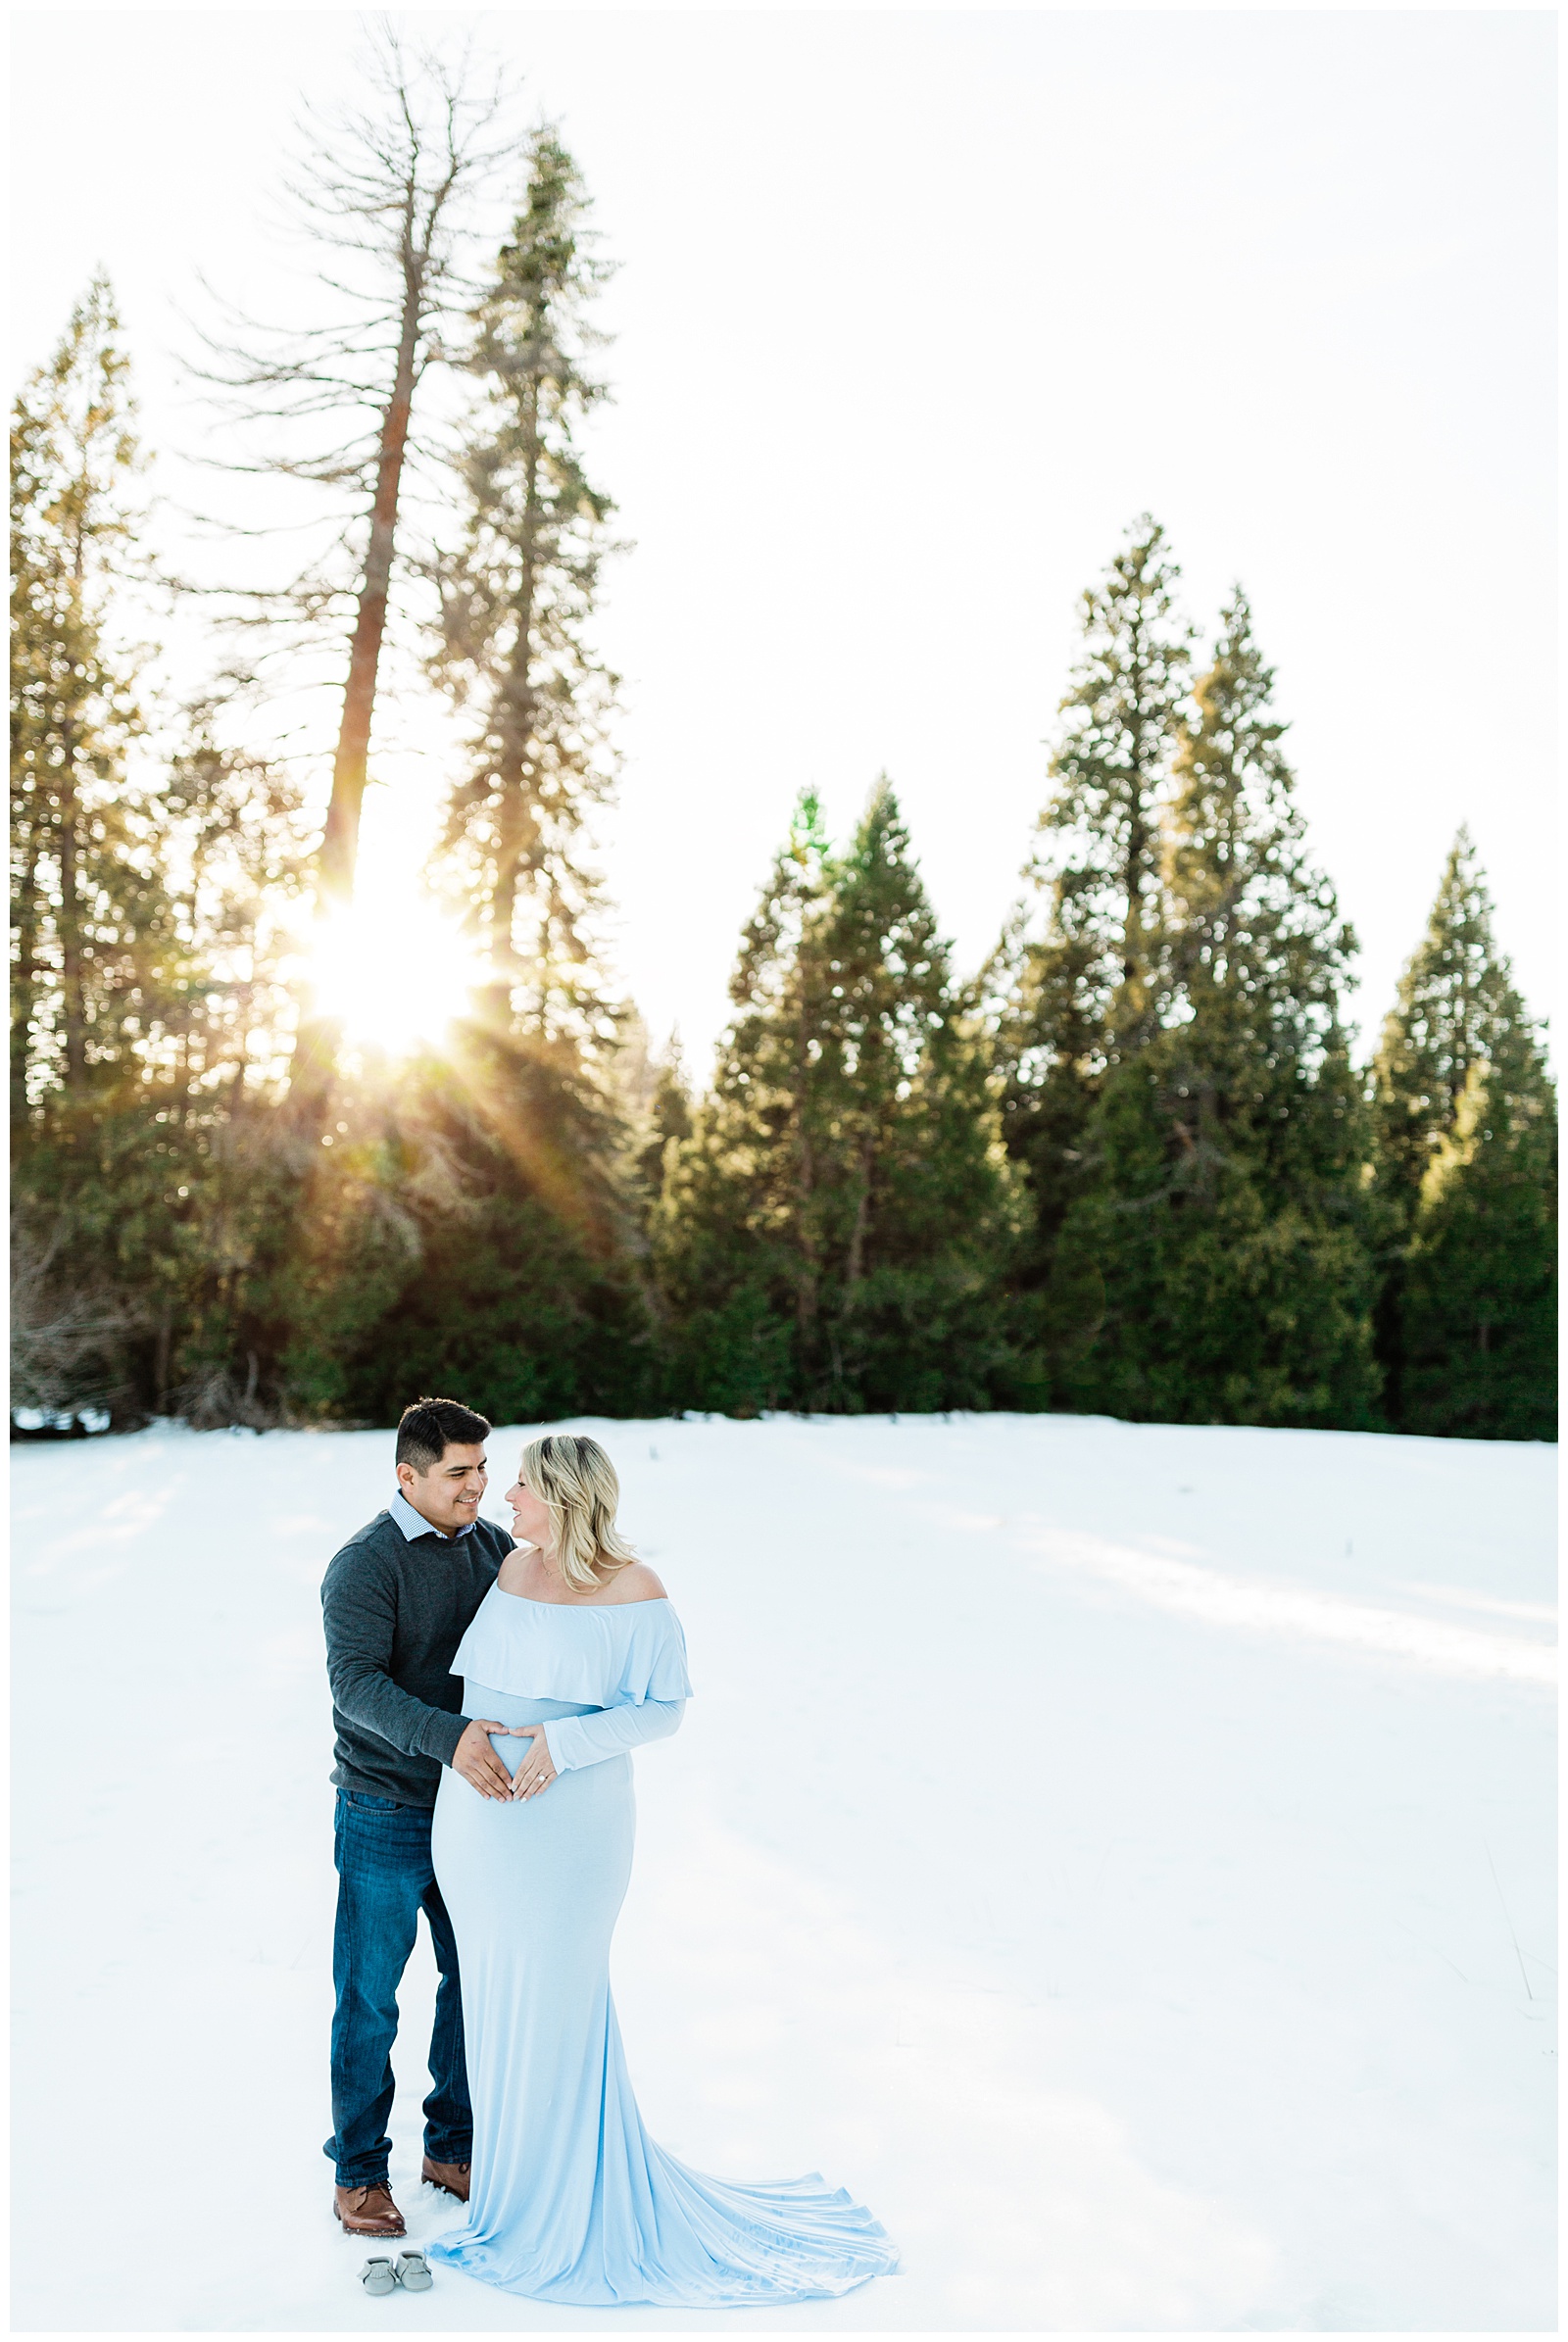 sunset maternity portraits in the snow